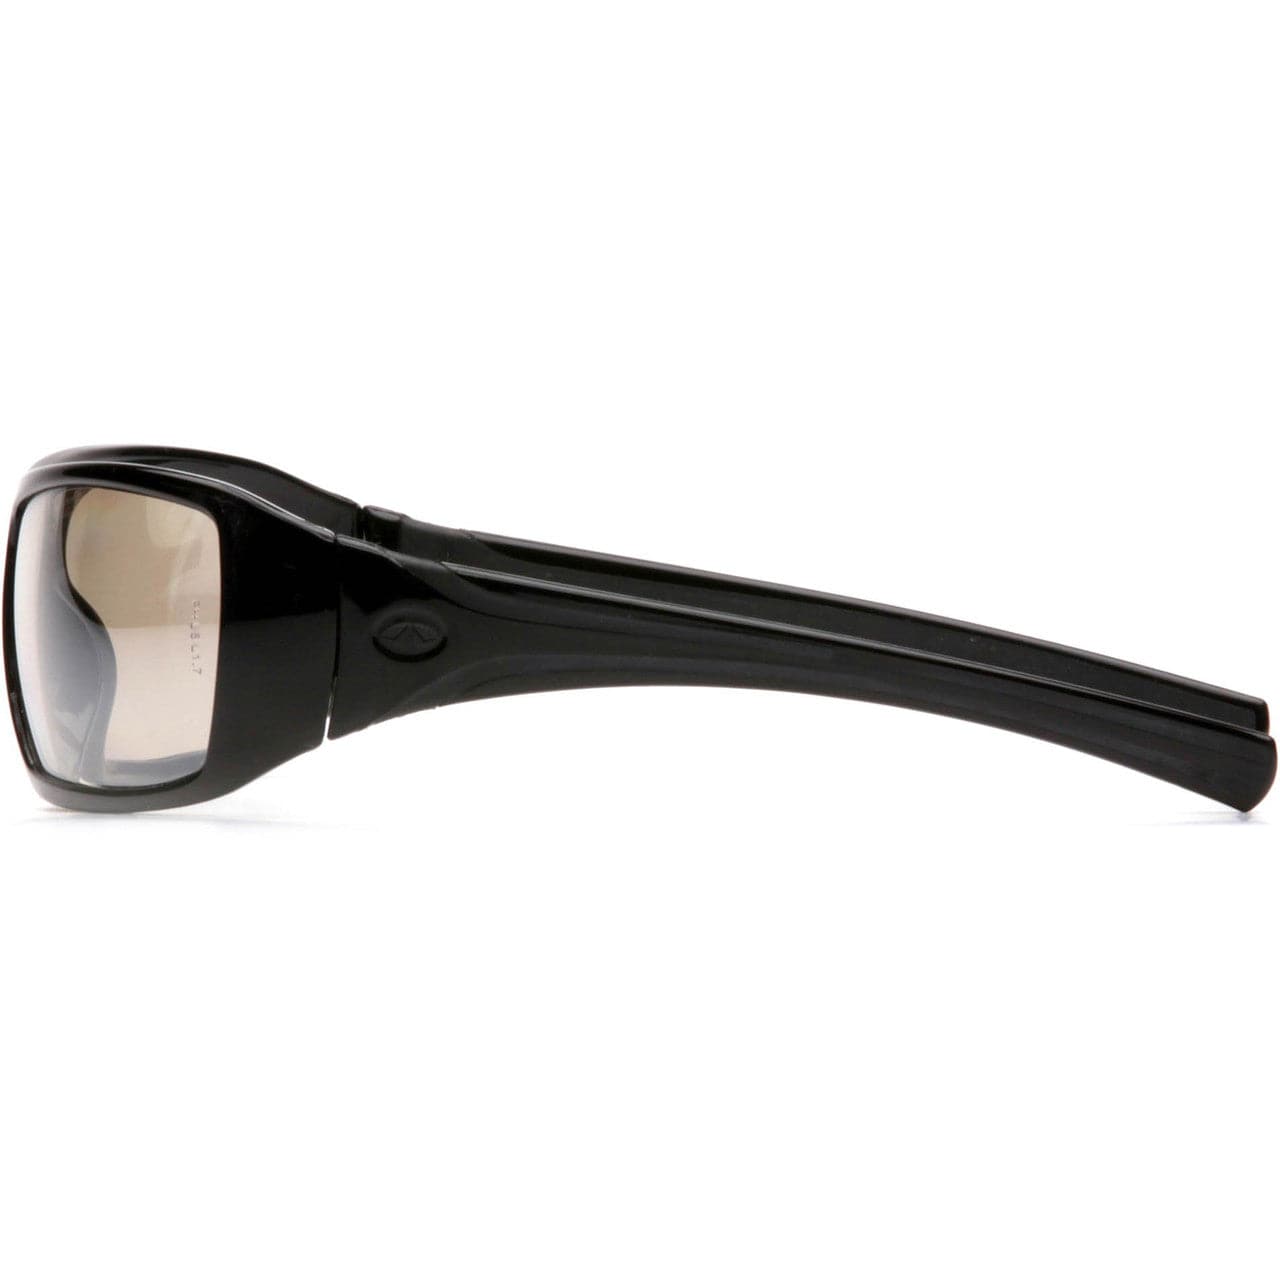 Pyramex Goliath Safety Glasses with Black Frame and Indoor/Outdoor Lens SB5680D Side View